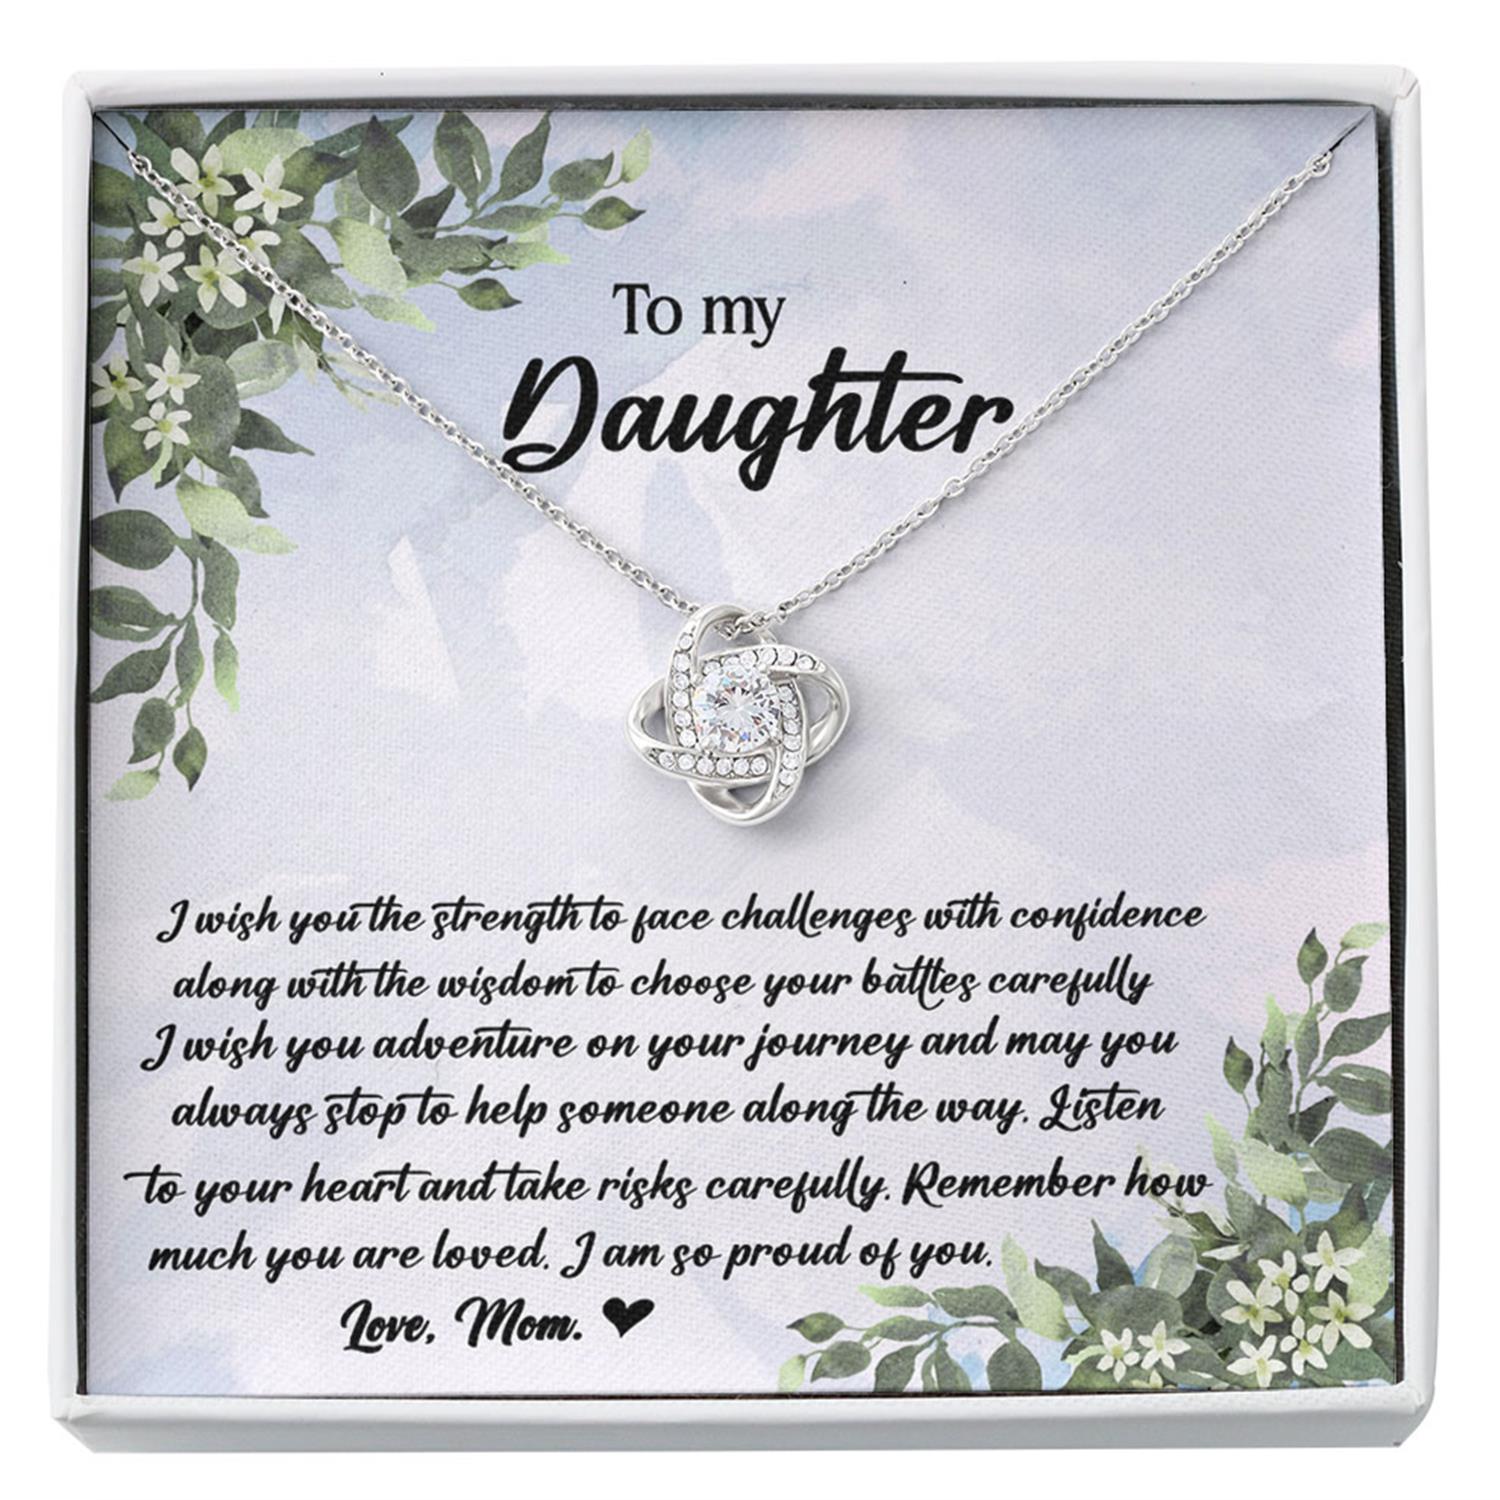 Daughter Necklace, Mom Necklace, Mother Daughter Necklace, To Beautiful Daughter, Unbreakable Bond Always Custom Necklace